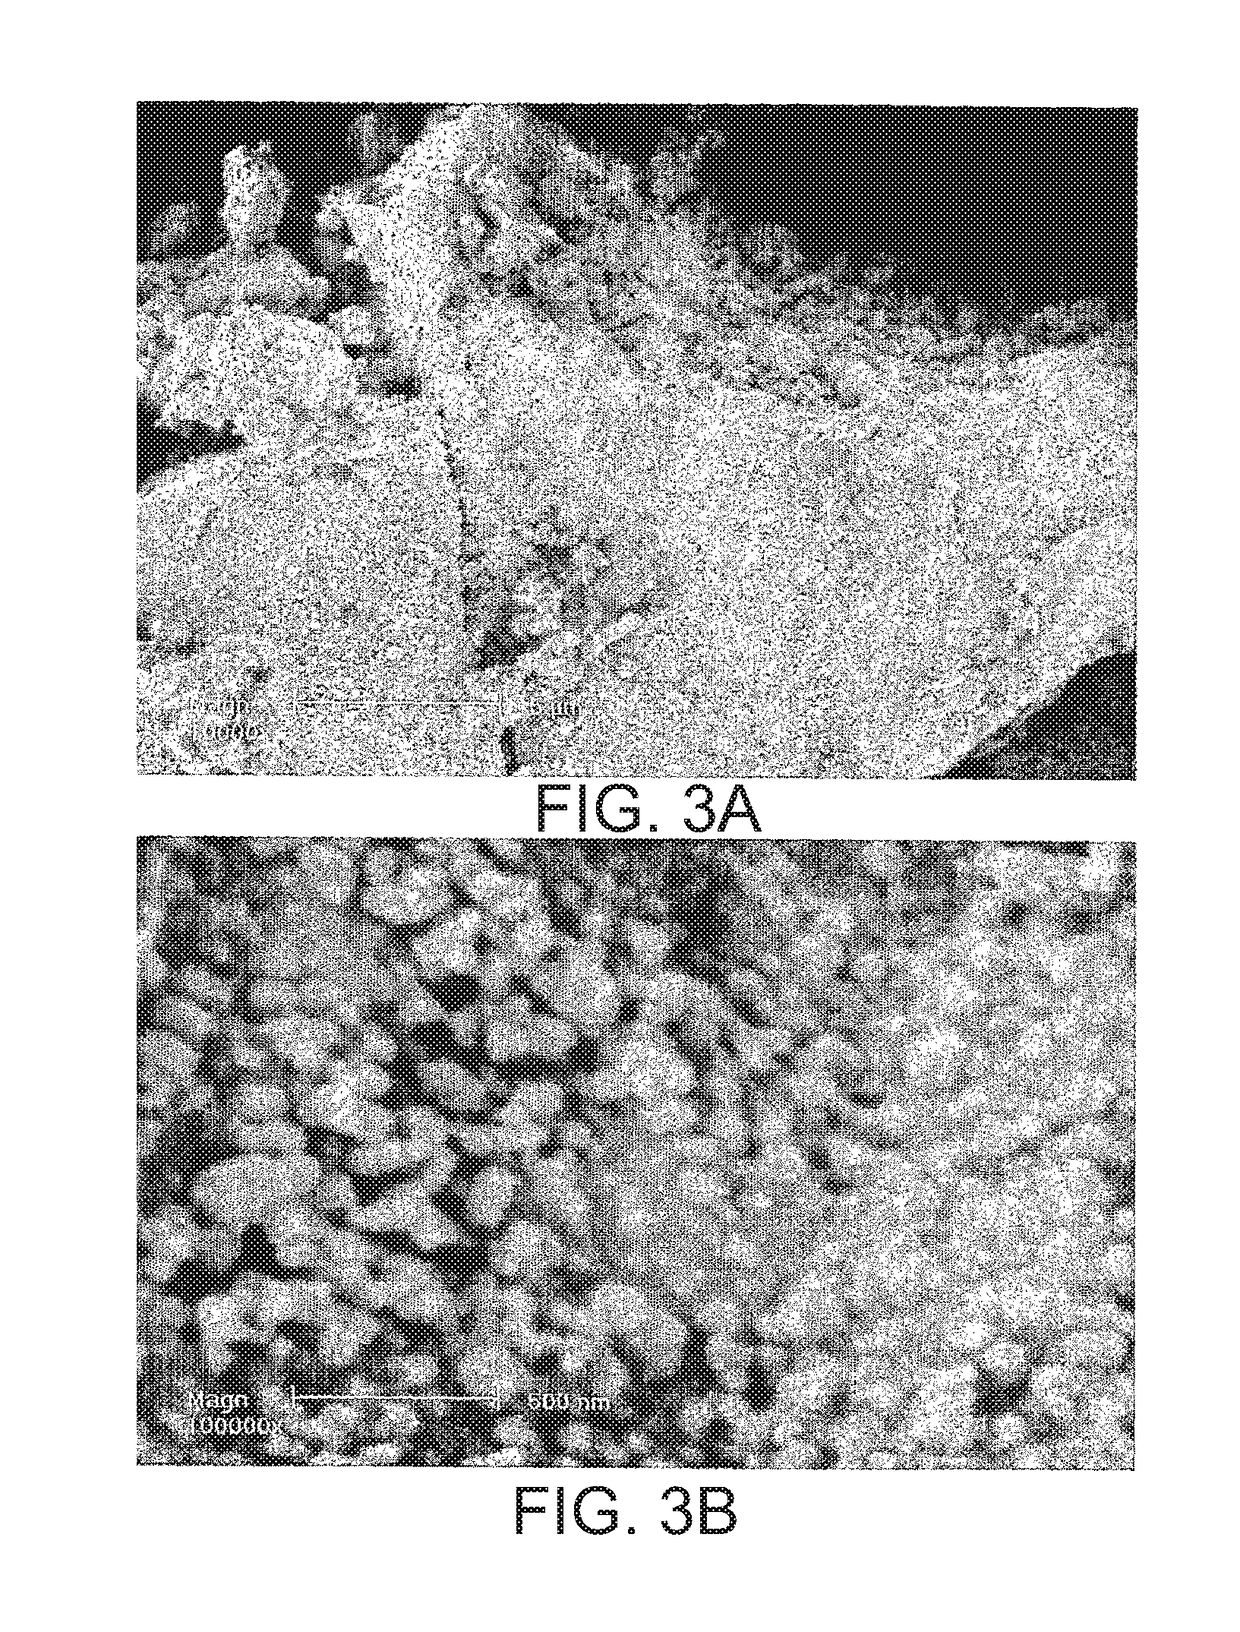 Methods for the preparation of biologically active compounds in nanoparticulate form